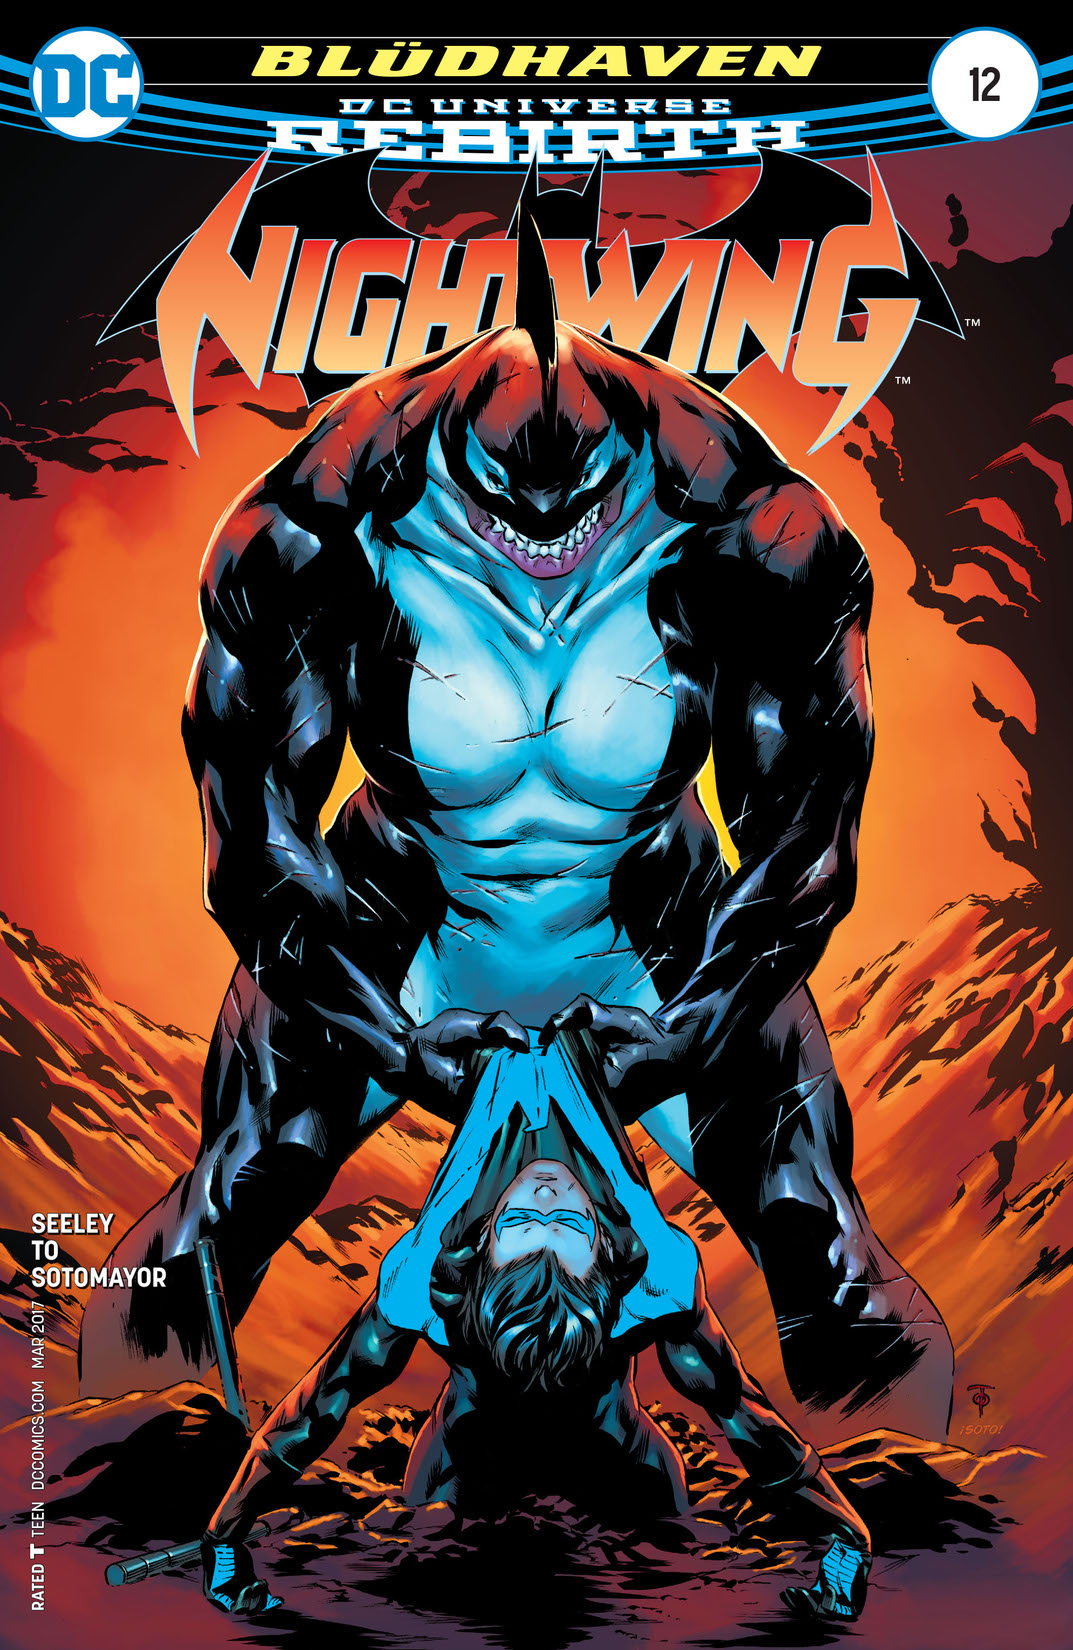 Nightwing (2016-) #12 preview images